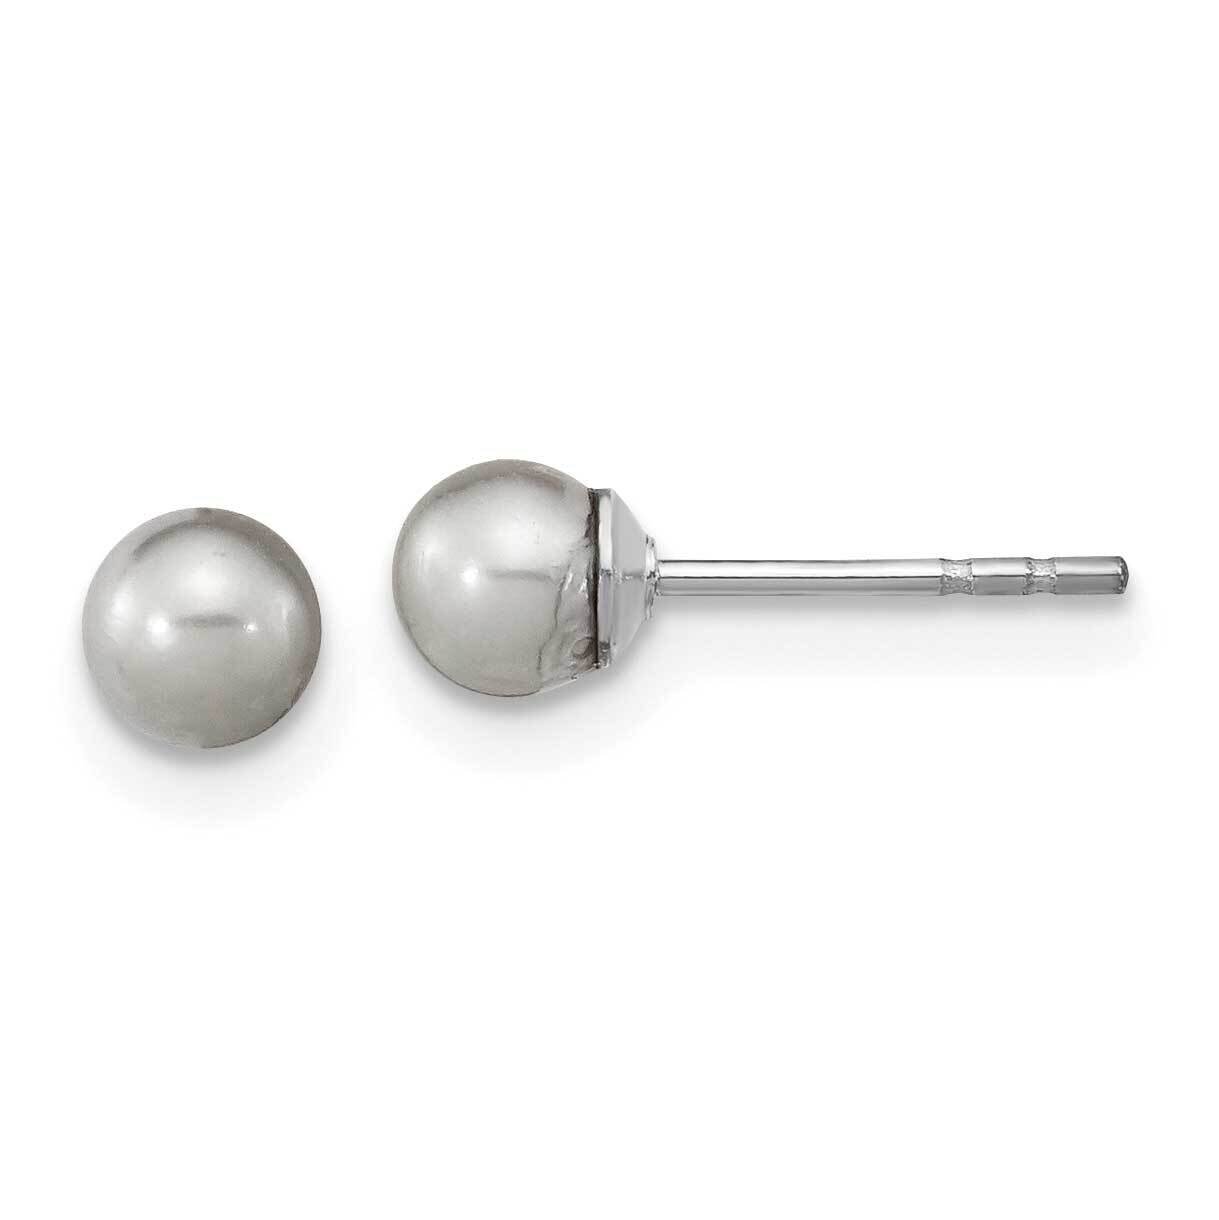 4-5mm Grey Round Fwc Pearl Post Earrings Sterling Silver Rhodium-Plated QE16330